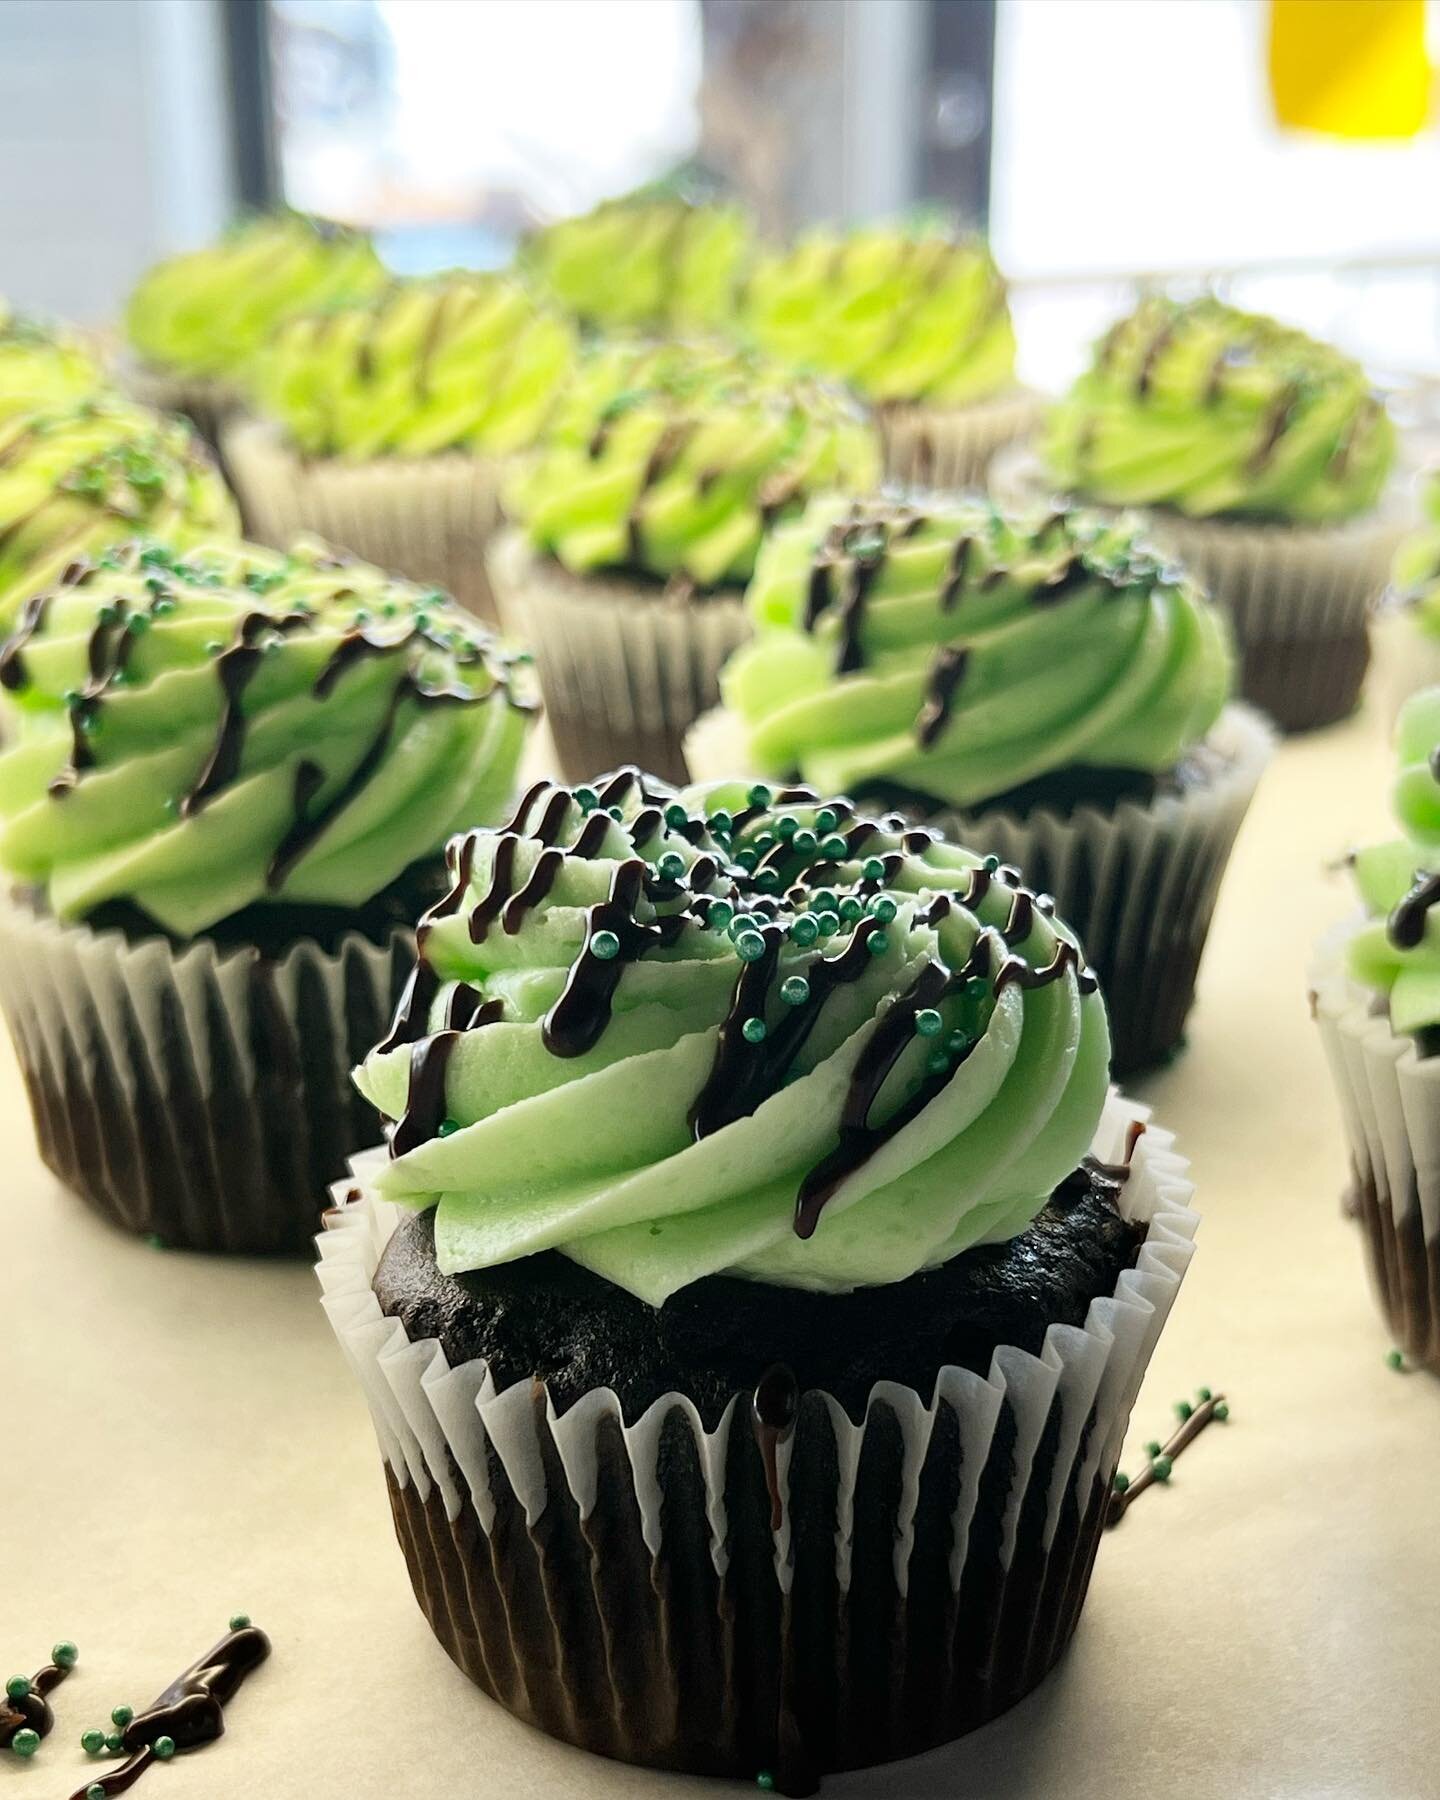 New Month! New Menu!
Here&rsquo;s todays lineup ☘️

Cupcakes:
-Dark Chocolate with Mint Buttercream
-Carrot with Cinnamon Buttercream

Cookies:
-Classic Iced Oatmeal
-Chocolate Marshmallow
-Vegan Chocolate Chip

Bars:
-White Chocolate Raspberry Chees